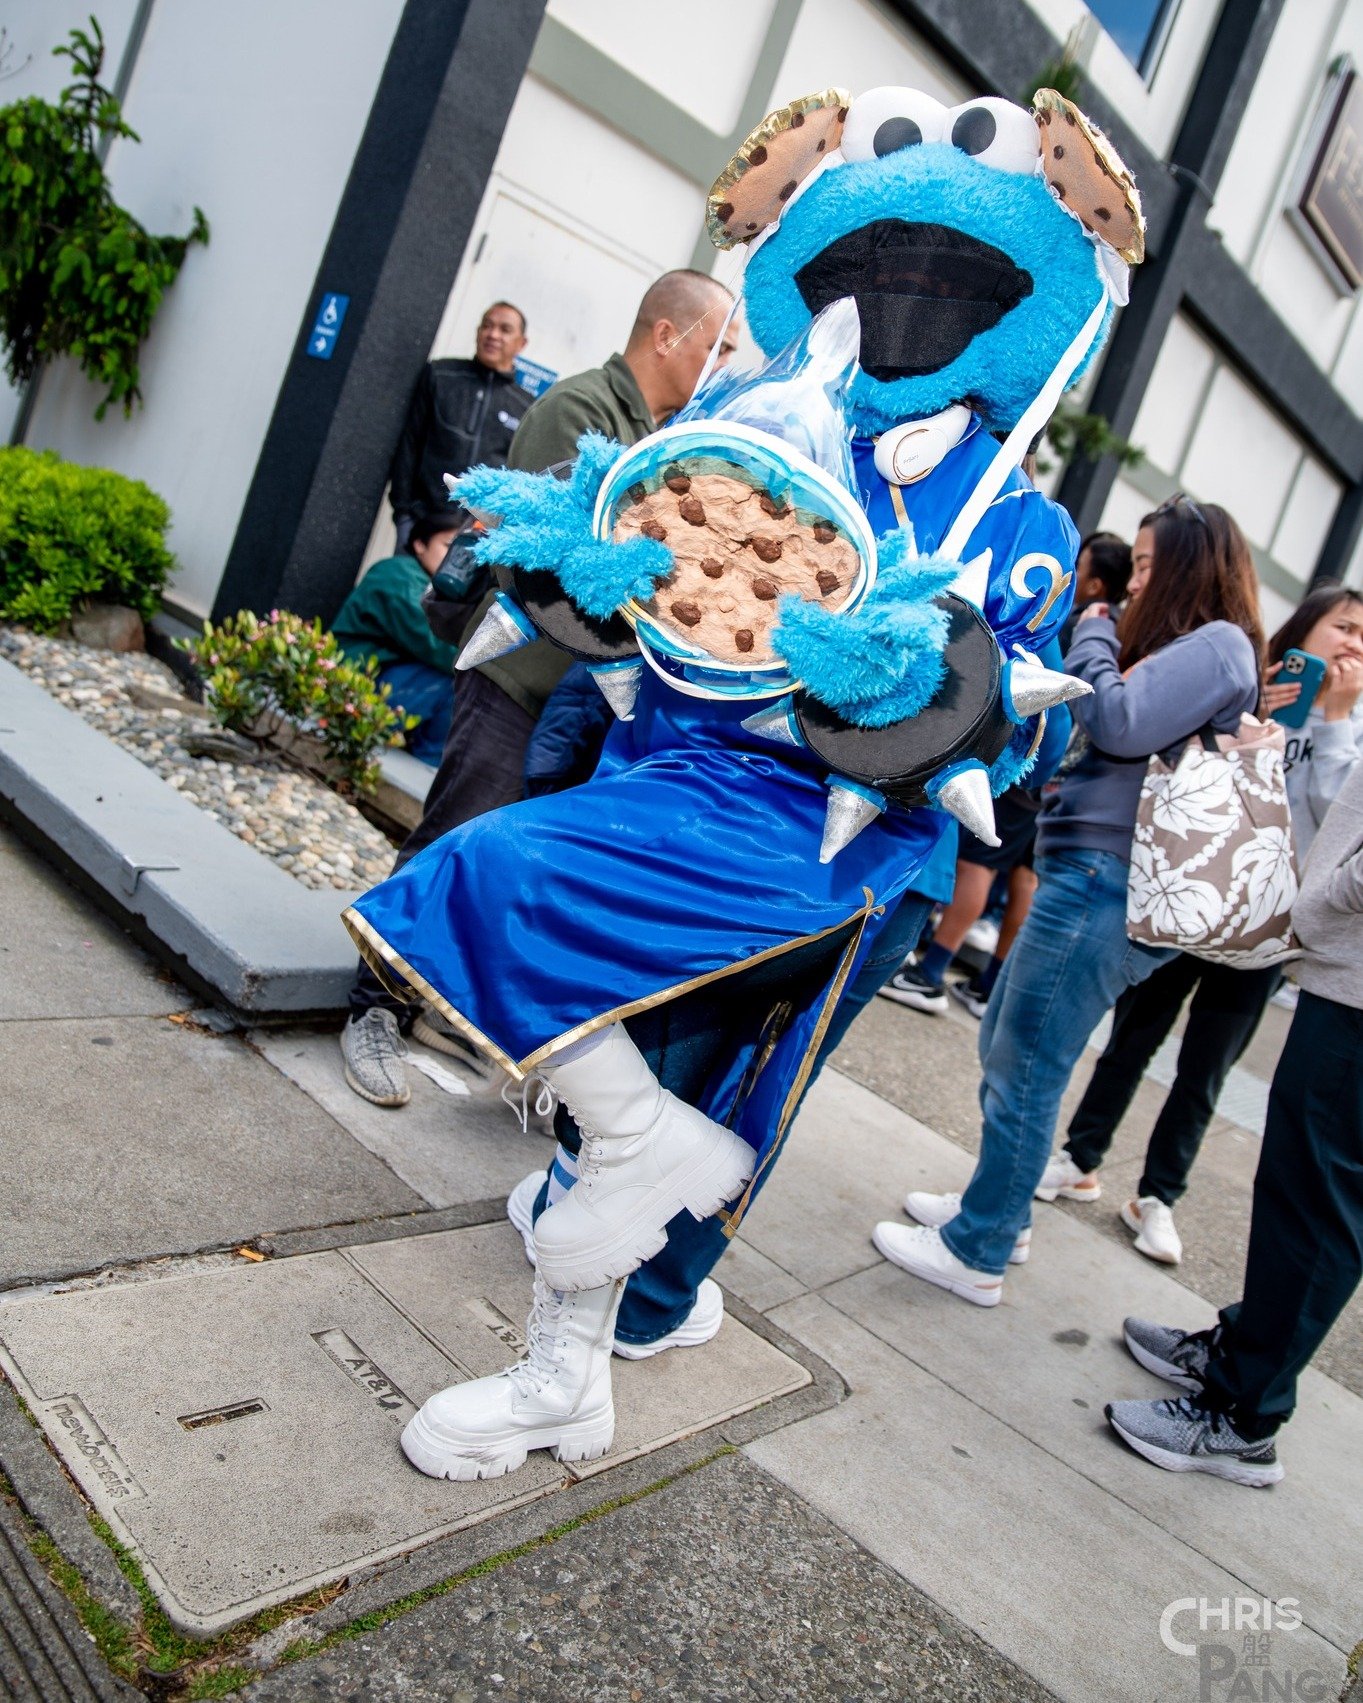 Not even Marvel can create a crossover that can surpass this awesome power.
#CookieMonsterChunLi: @uptilsleep 

Photos from the 1st week of the NorCal Cherry Blossom Festival are up. You can find them on FB or my site: https://chrispang-productions.c